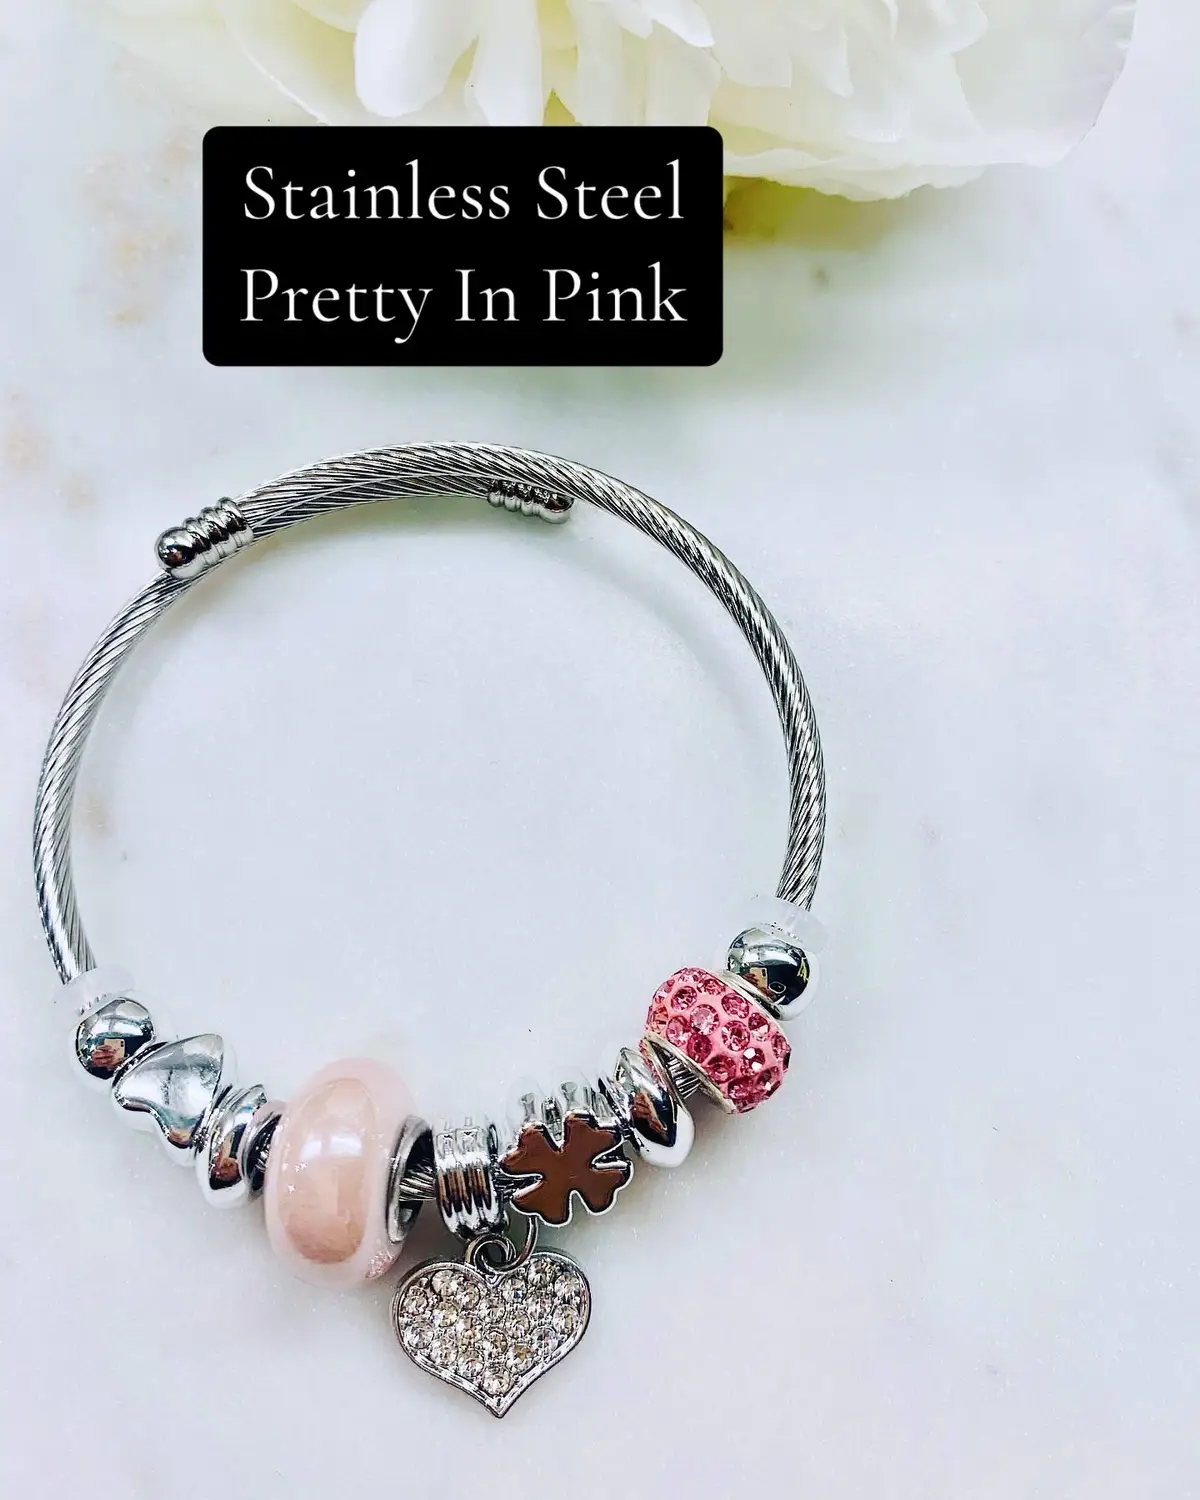 Check out these beautiful stainless steel Bracelets!  Free domestic shipping when you purchase 2! #fypシ゚viral #fyp #jewelry #shopping #jewelry #christmas #christmasgiftideas 